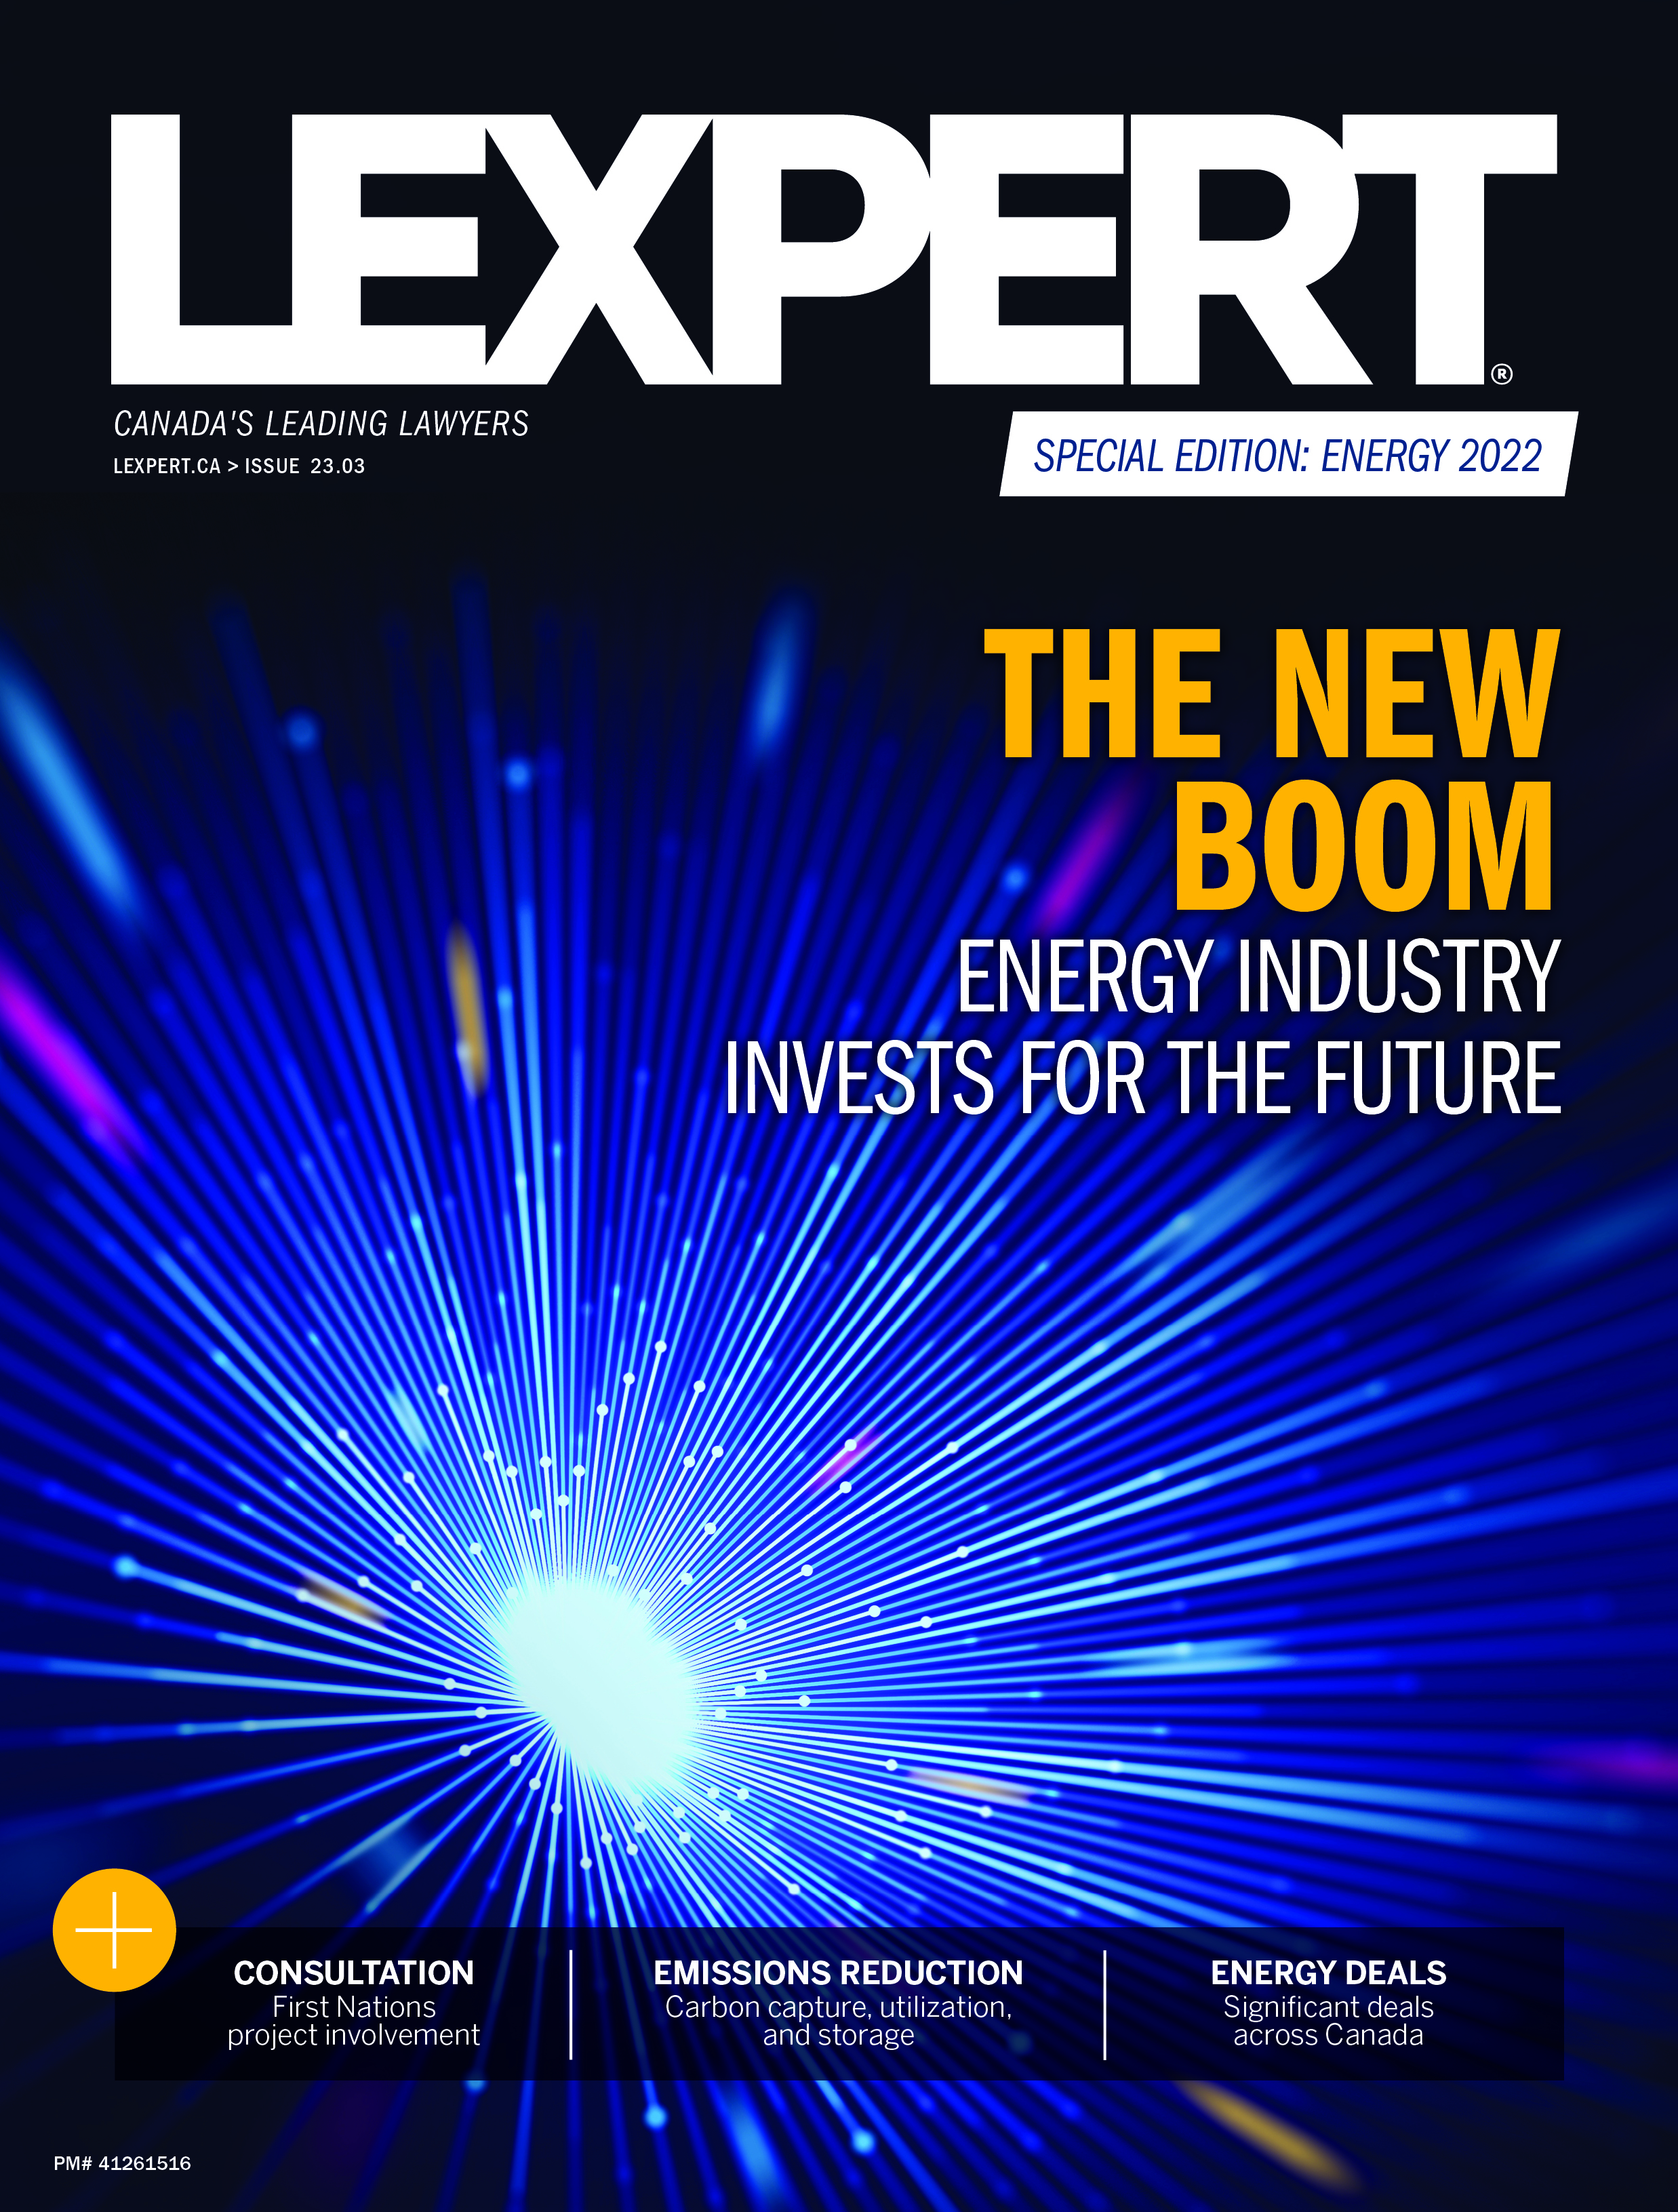 The Lexpert Special Edition: Energy 2022